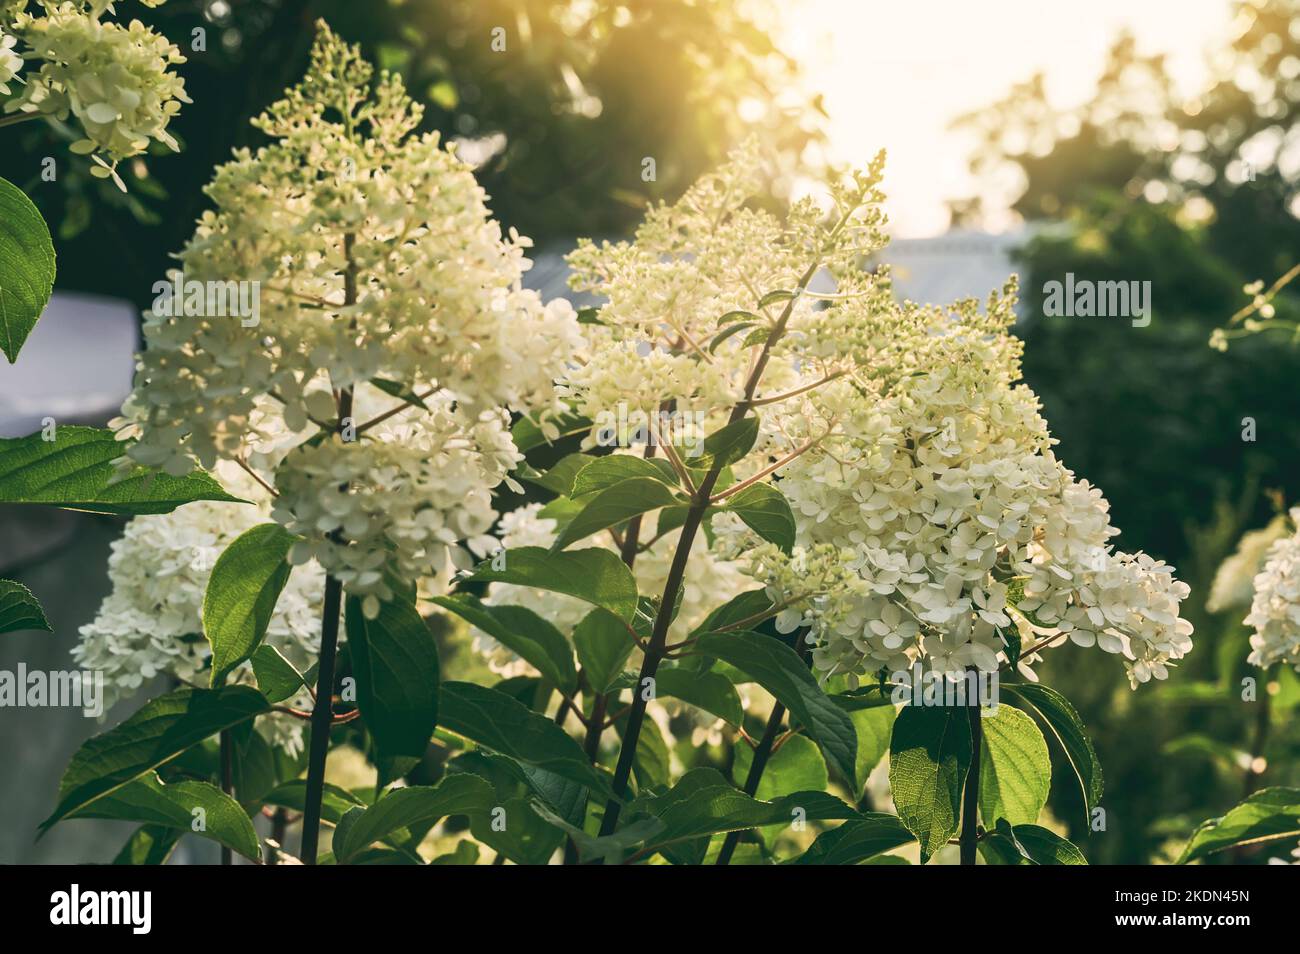 white paniculata hydrangea. Hydrangea paniculata Sundae Fraise boasting loose, fluffy, conical flower heads at the tips of arching branches in bright Stock Photo